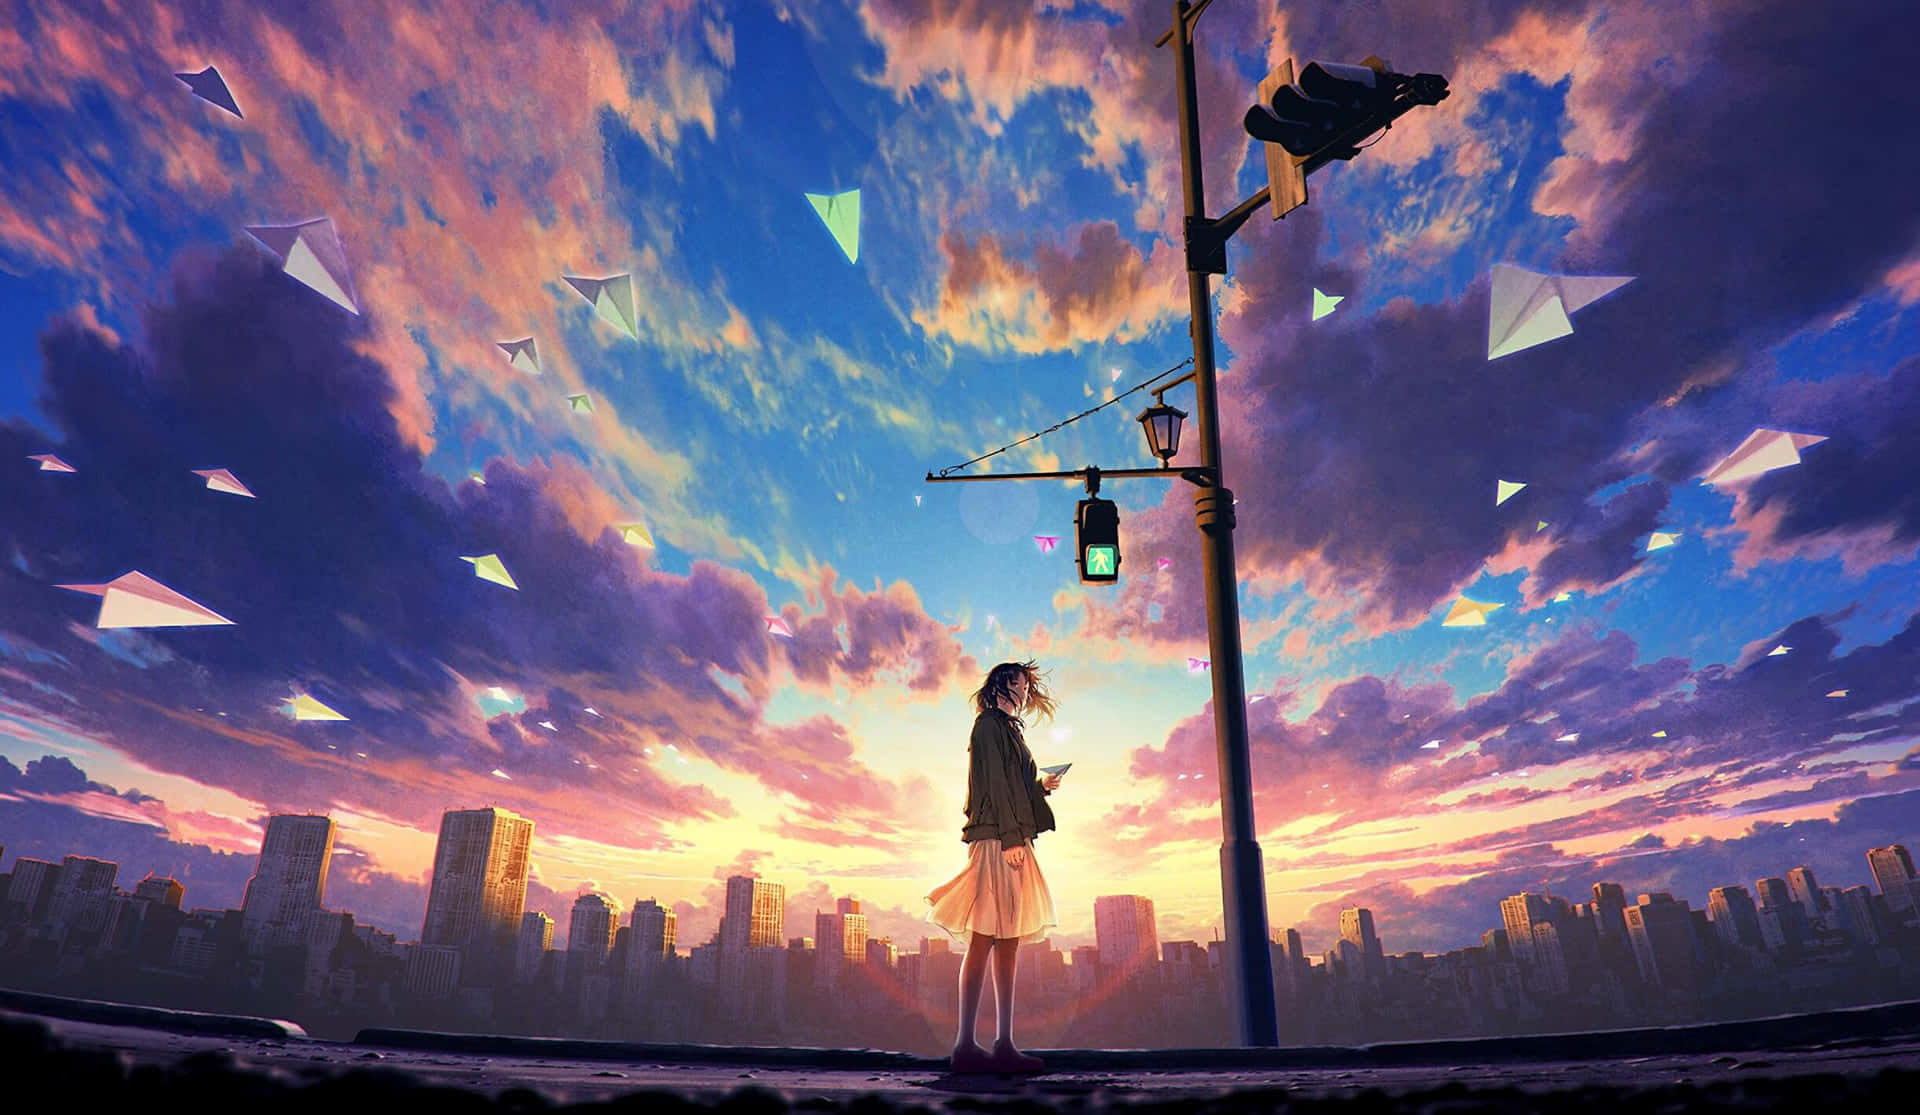 Dive into Mythical Worlds with Anime Art